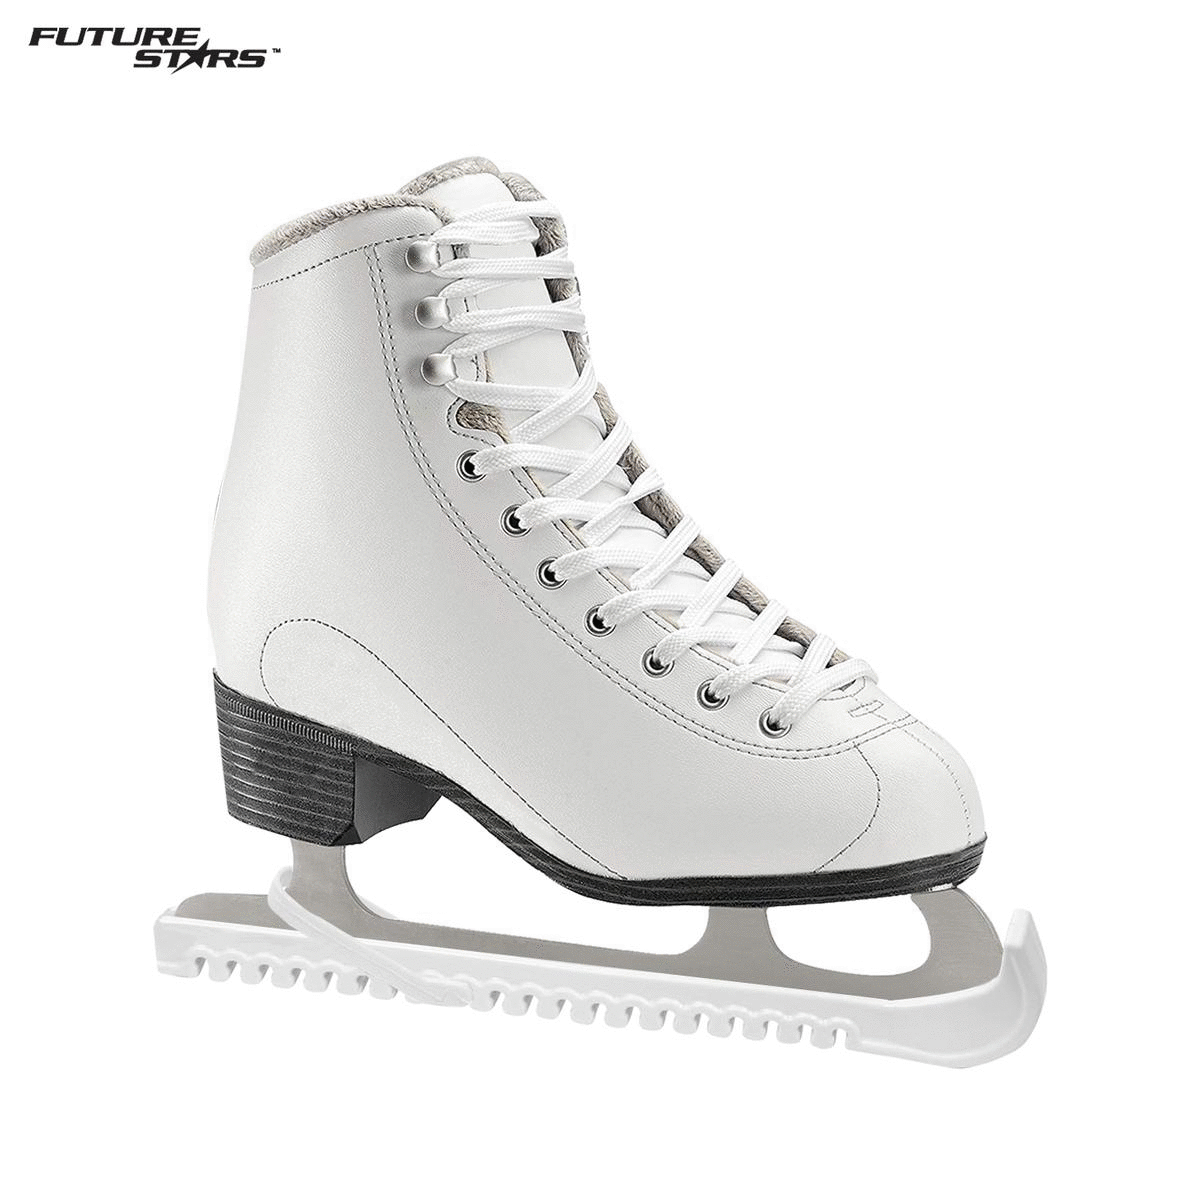 show original title Details about   Ice Hockey Skates Protective Blue Ice Skating Skates Blade Guards Cover Blade Guards 